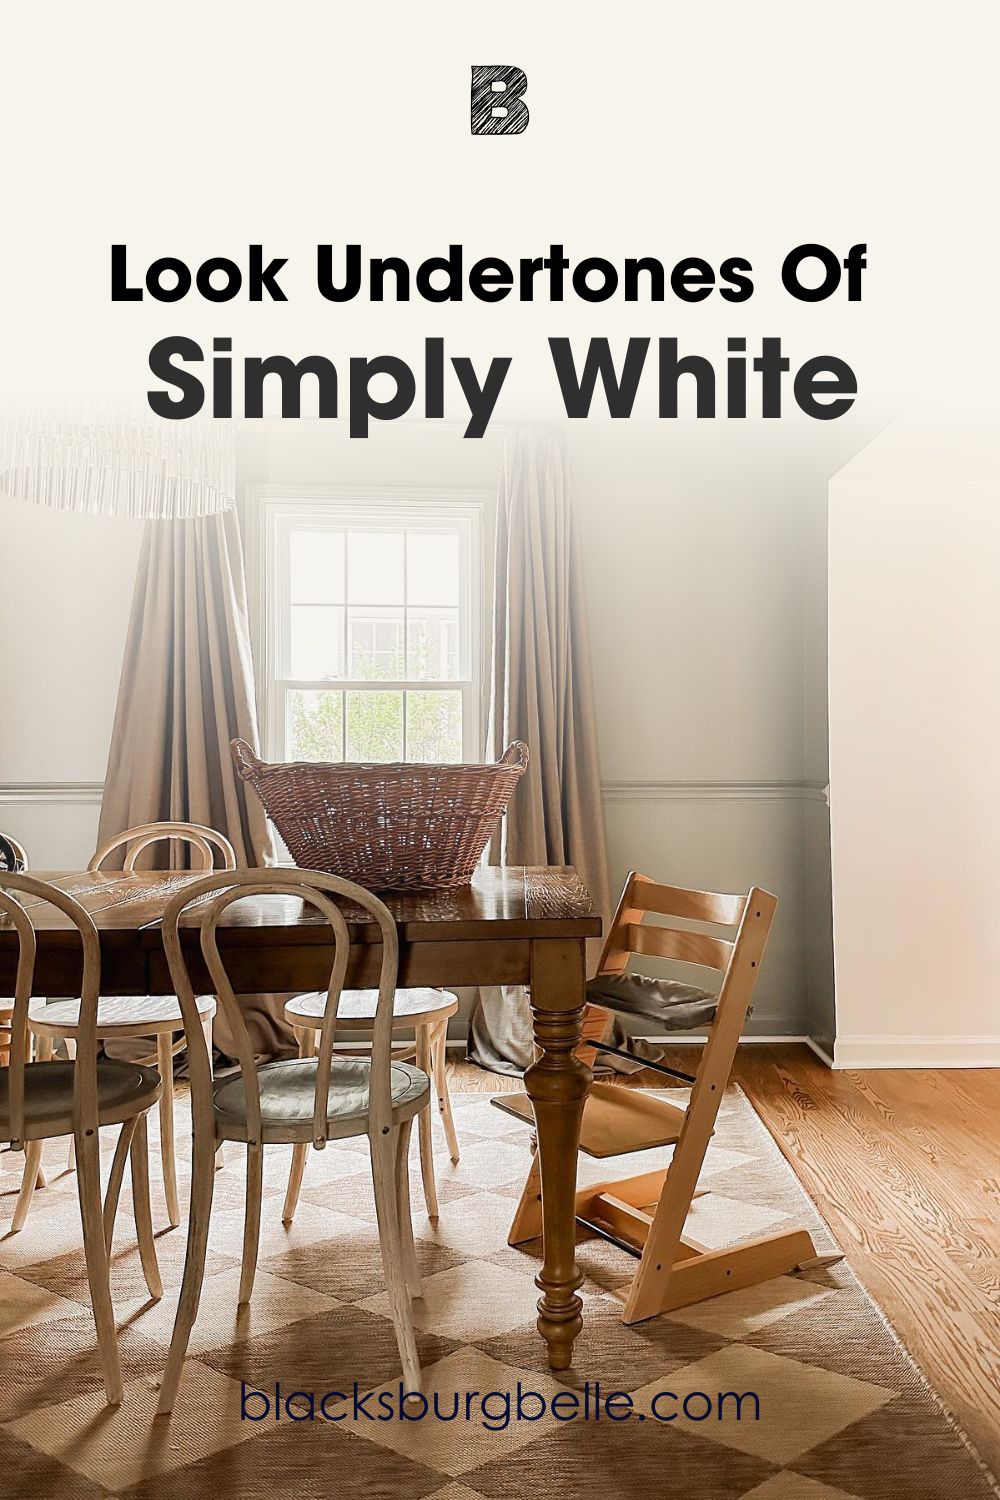 A Closer Look at Simply White’s Undertones